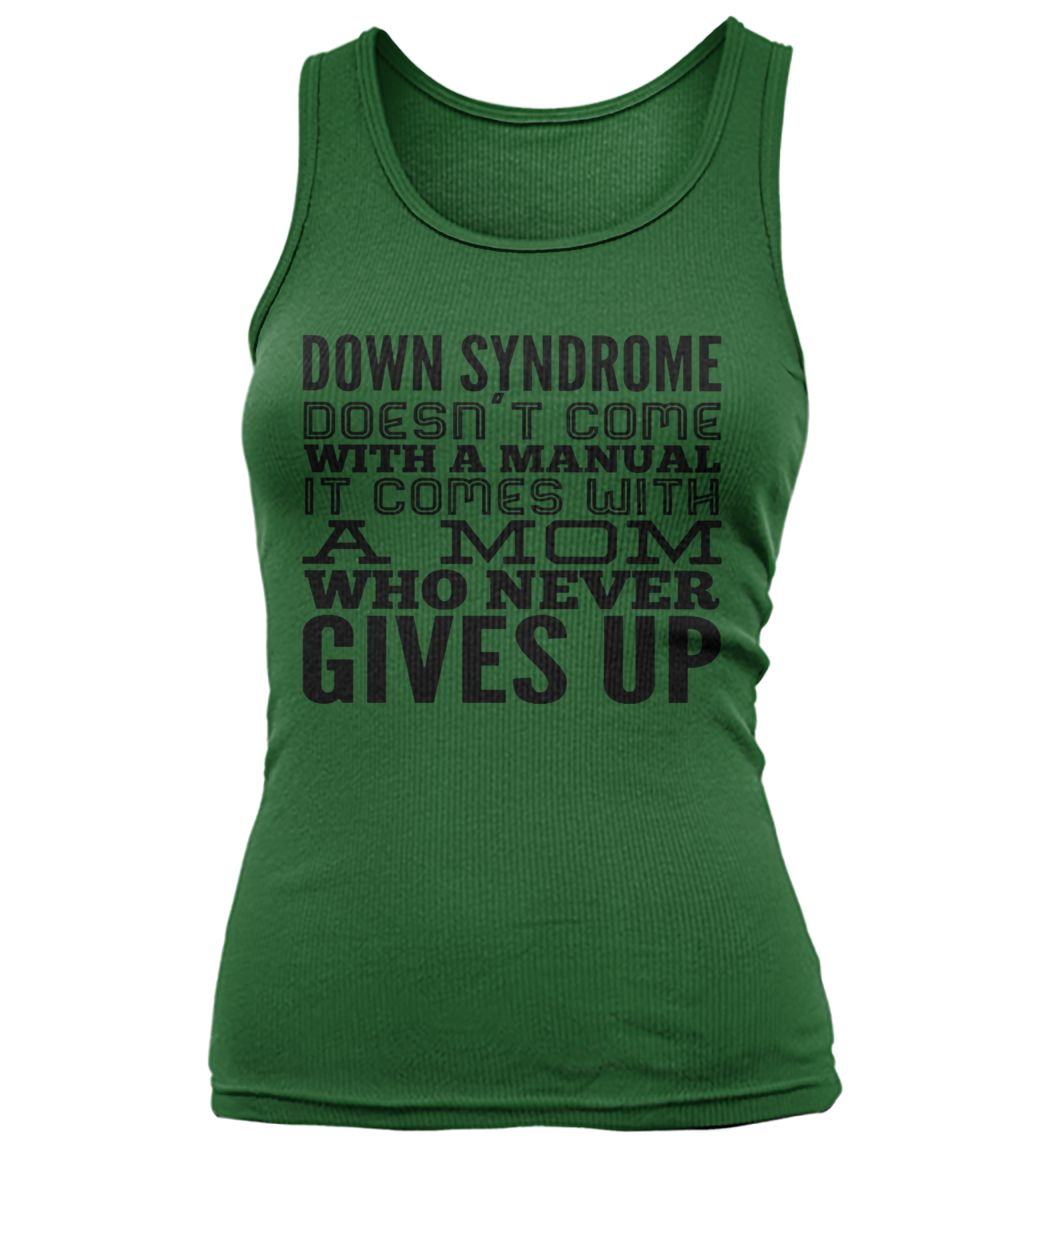 Down syndrome doesn't come with a manual women's tank top